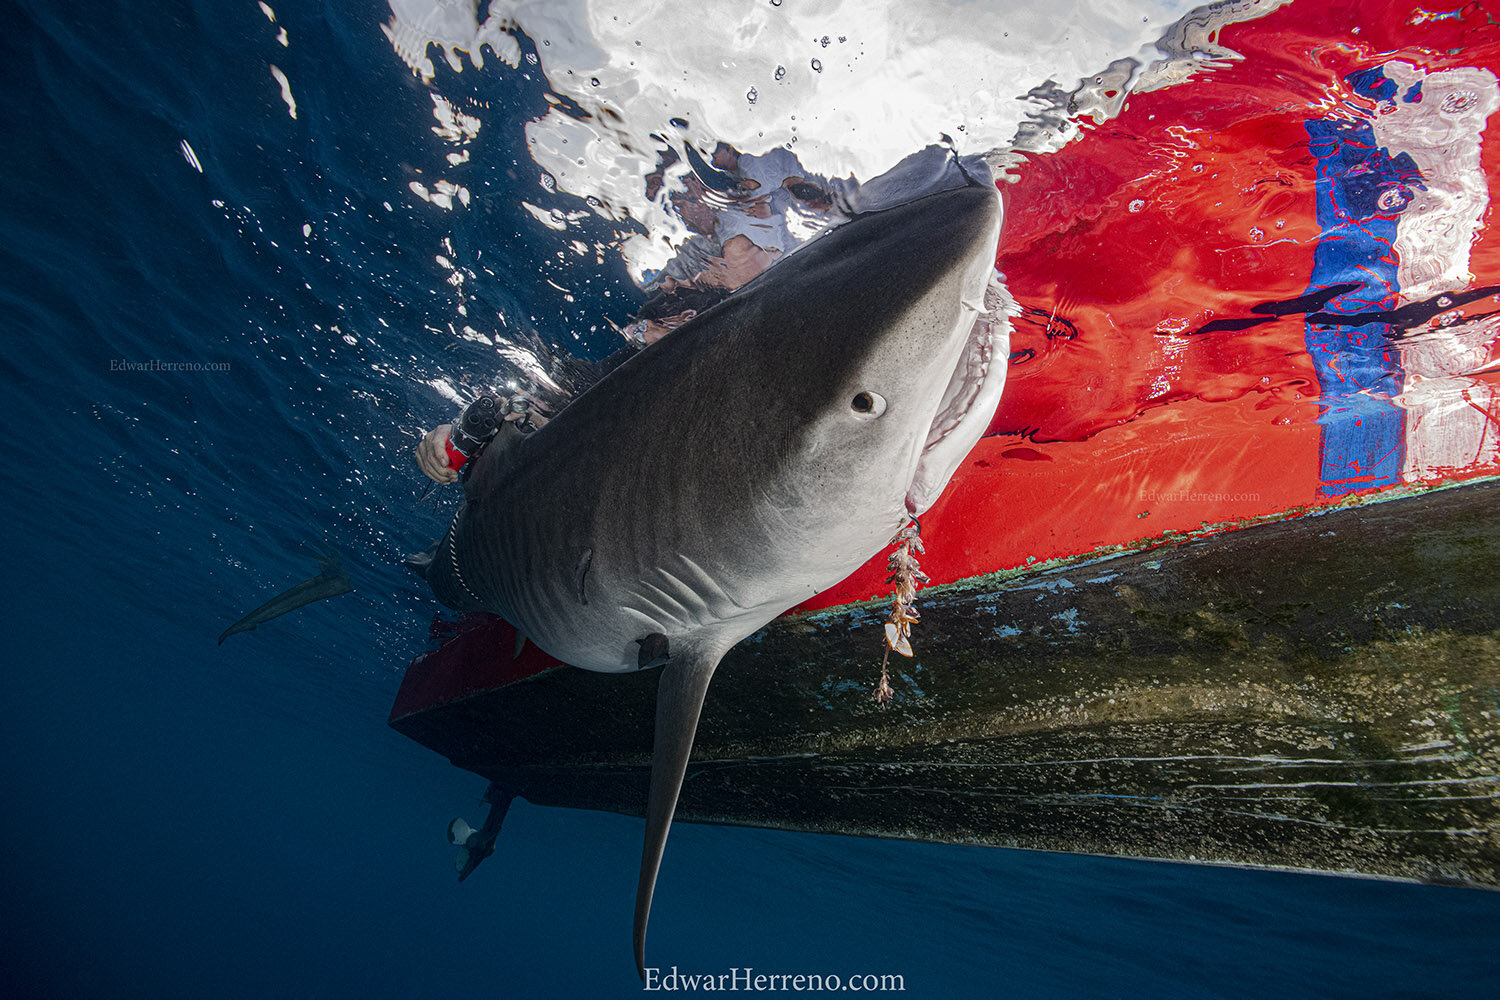 Scientist from MIGRAMAR are installing acoustic & satellite tags and a CAT (video camera) on a tiger shark - Cocos Island.